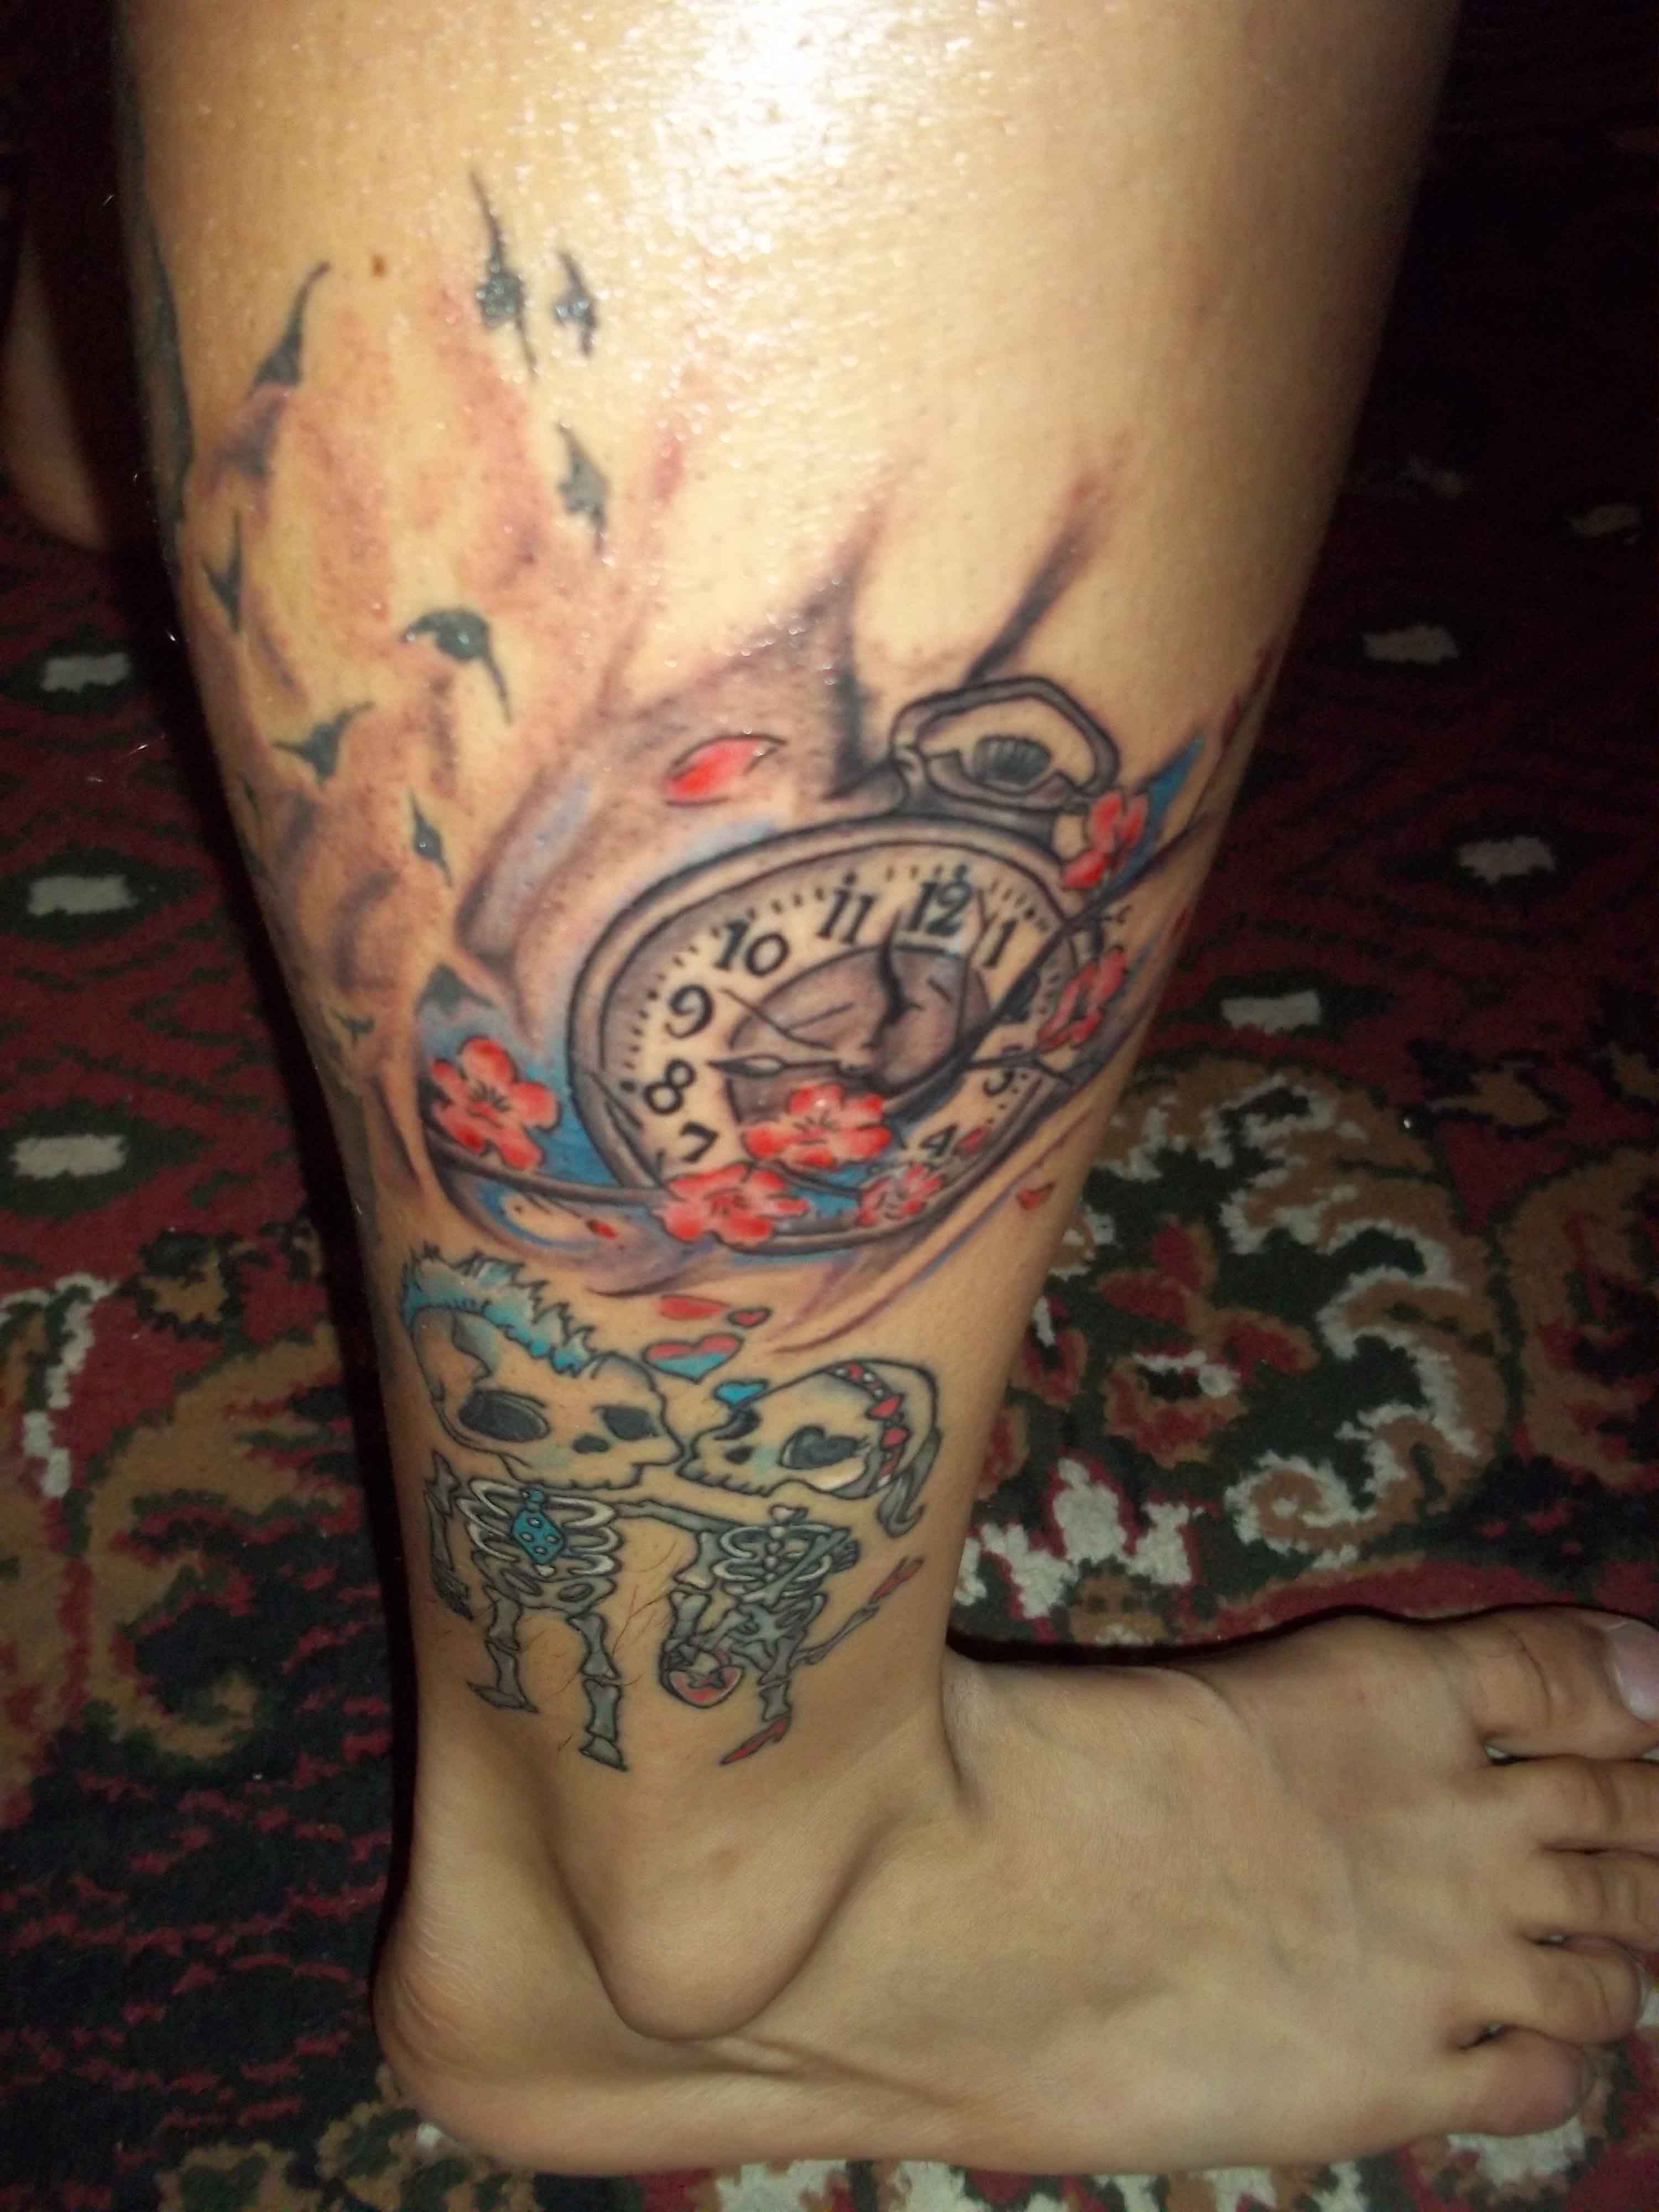 Pocket Watch With Flowers And Skeletons Tattoo On Leg